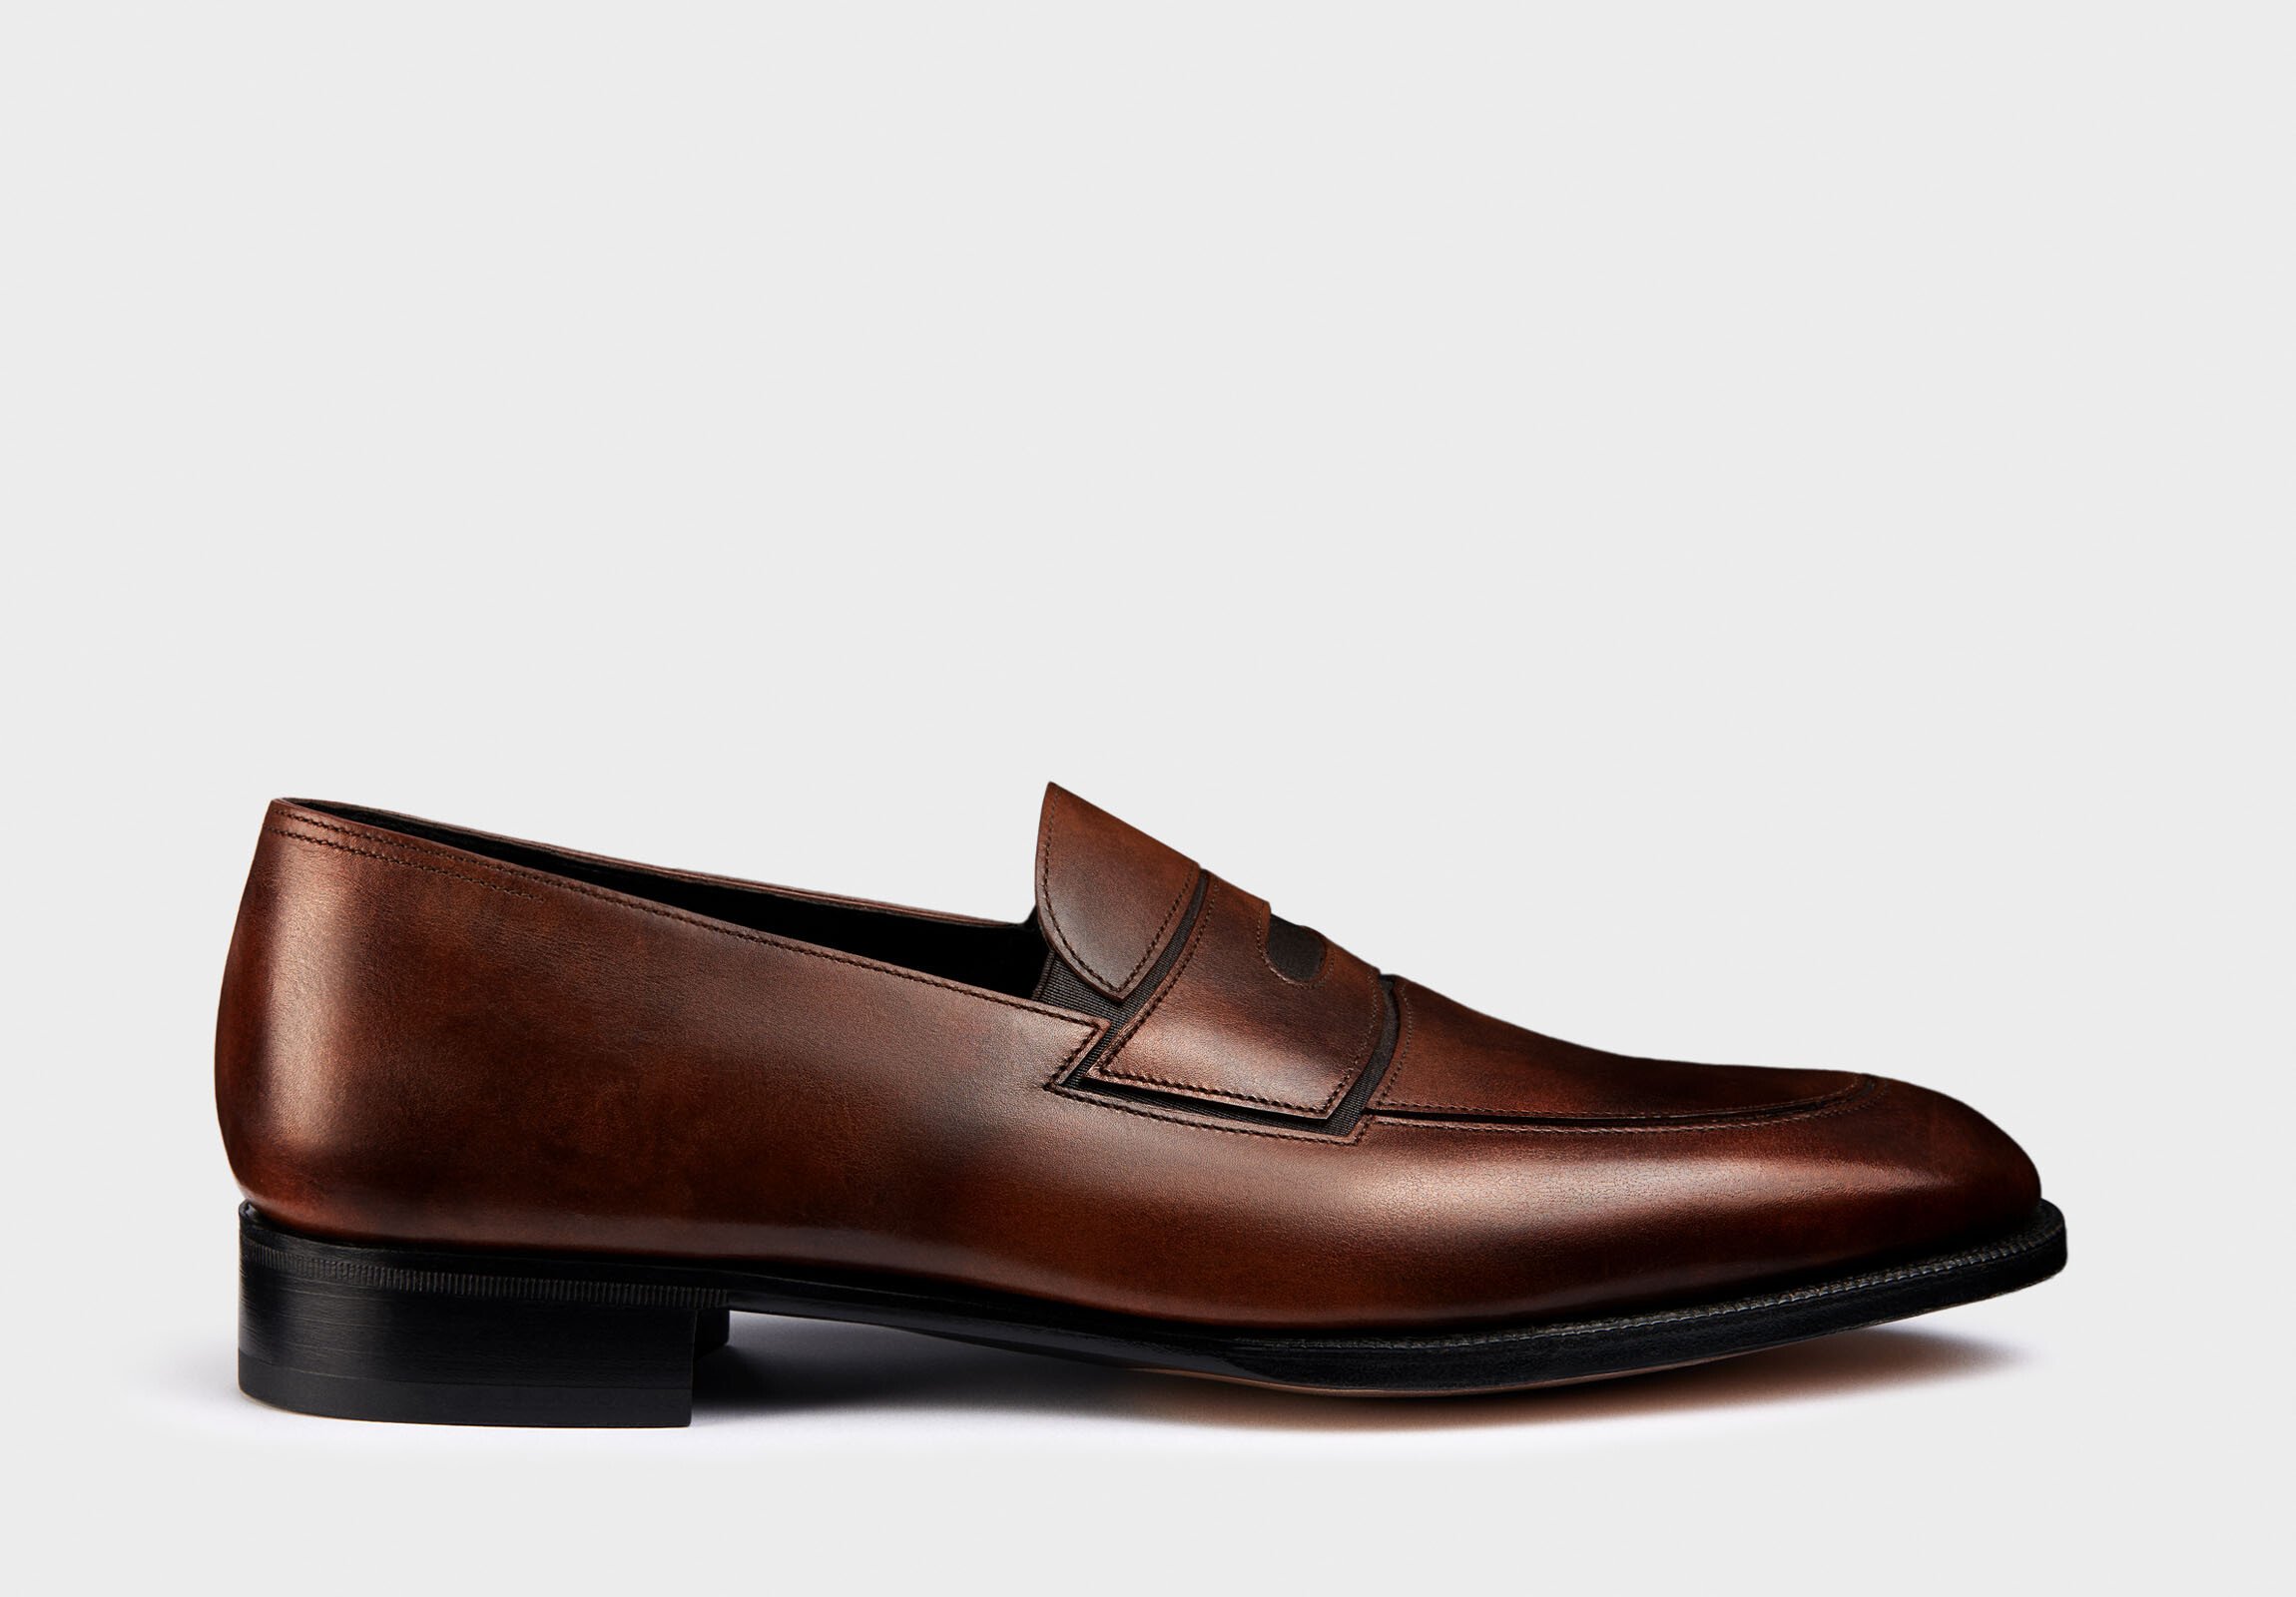 The classic men's shoe: Leather or rubber sole - MORJAS